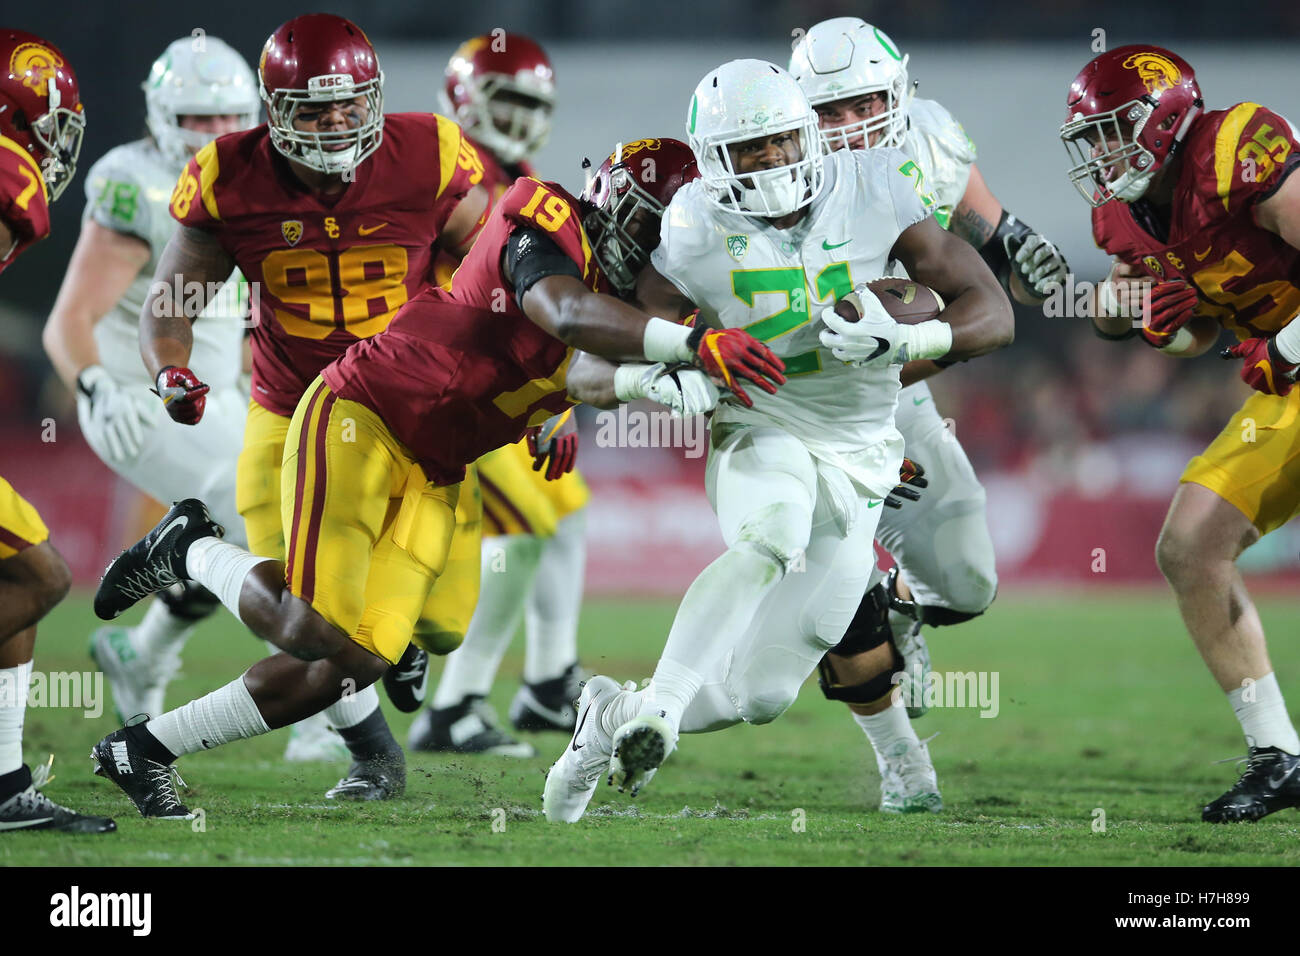 Los Angeles, CA, US, USA. 5th Nov, 2016. November 5, 2016: Oregon Ducks running back Royce Freeman (21) tries to outrun a tackle attempt by USC Trojans linebacker Michael Hutchings (19) in the game between the Oregon Ducks and the USC Trojans, The Coliseum in Los Angeles, CA. Peter Joneleit/ Zuma Wire © Peter Joneleit/ZUMA Wire/Alamy Live News Stock Photo